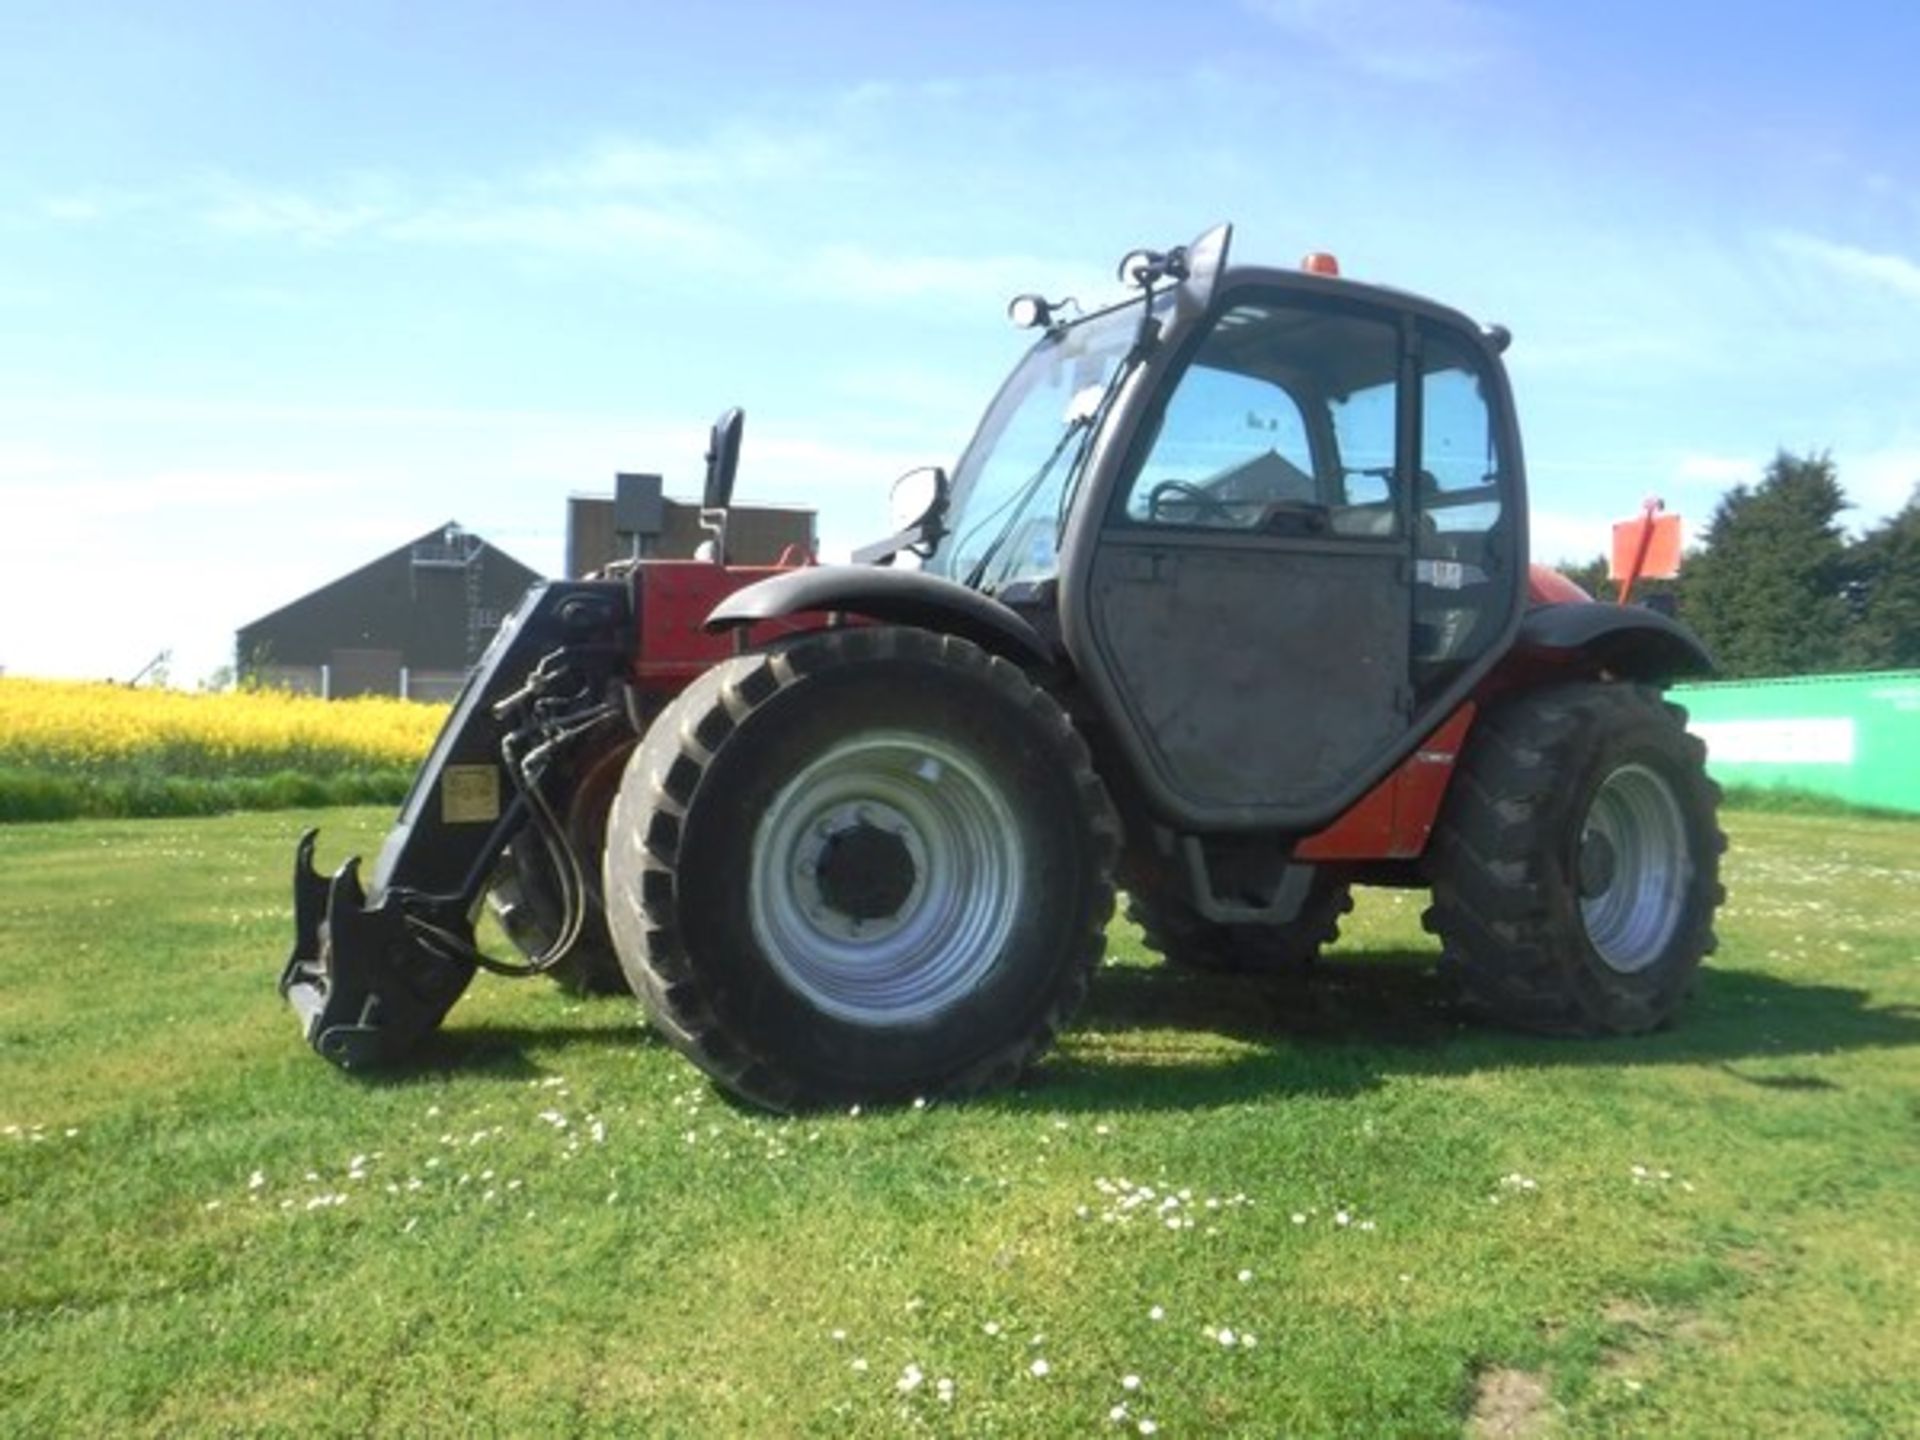 2011 MANITOU MLT627 TURBO. Air con. Solid filled tyres. Reg No SP60 ECW. 4798hrs (not verified) - Image 11 of 18